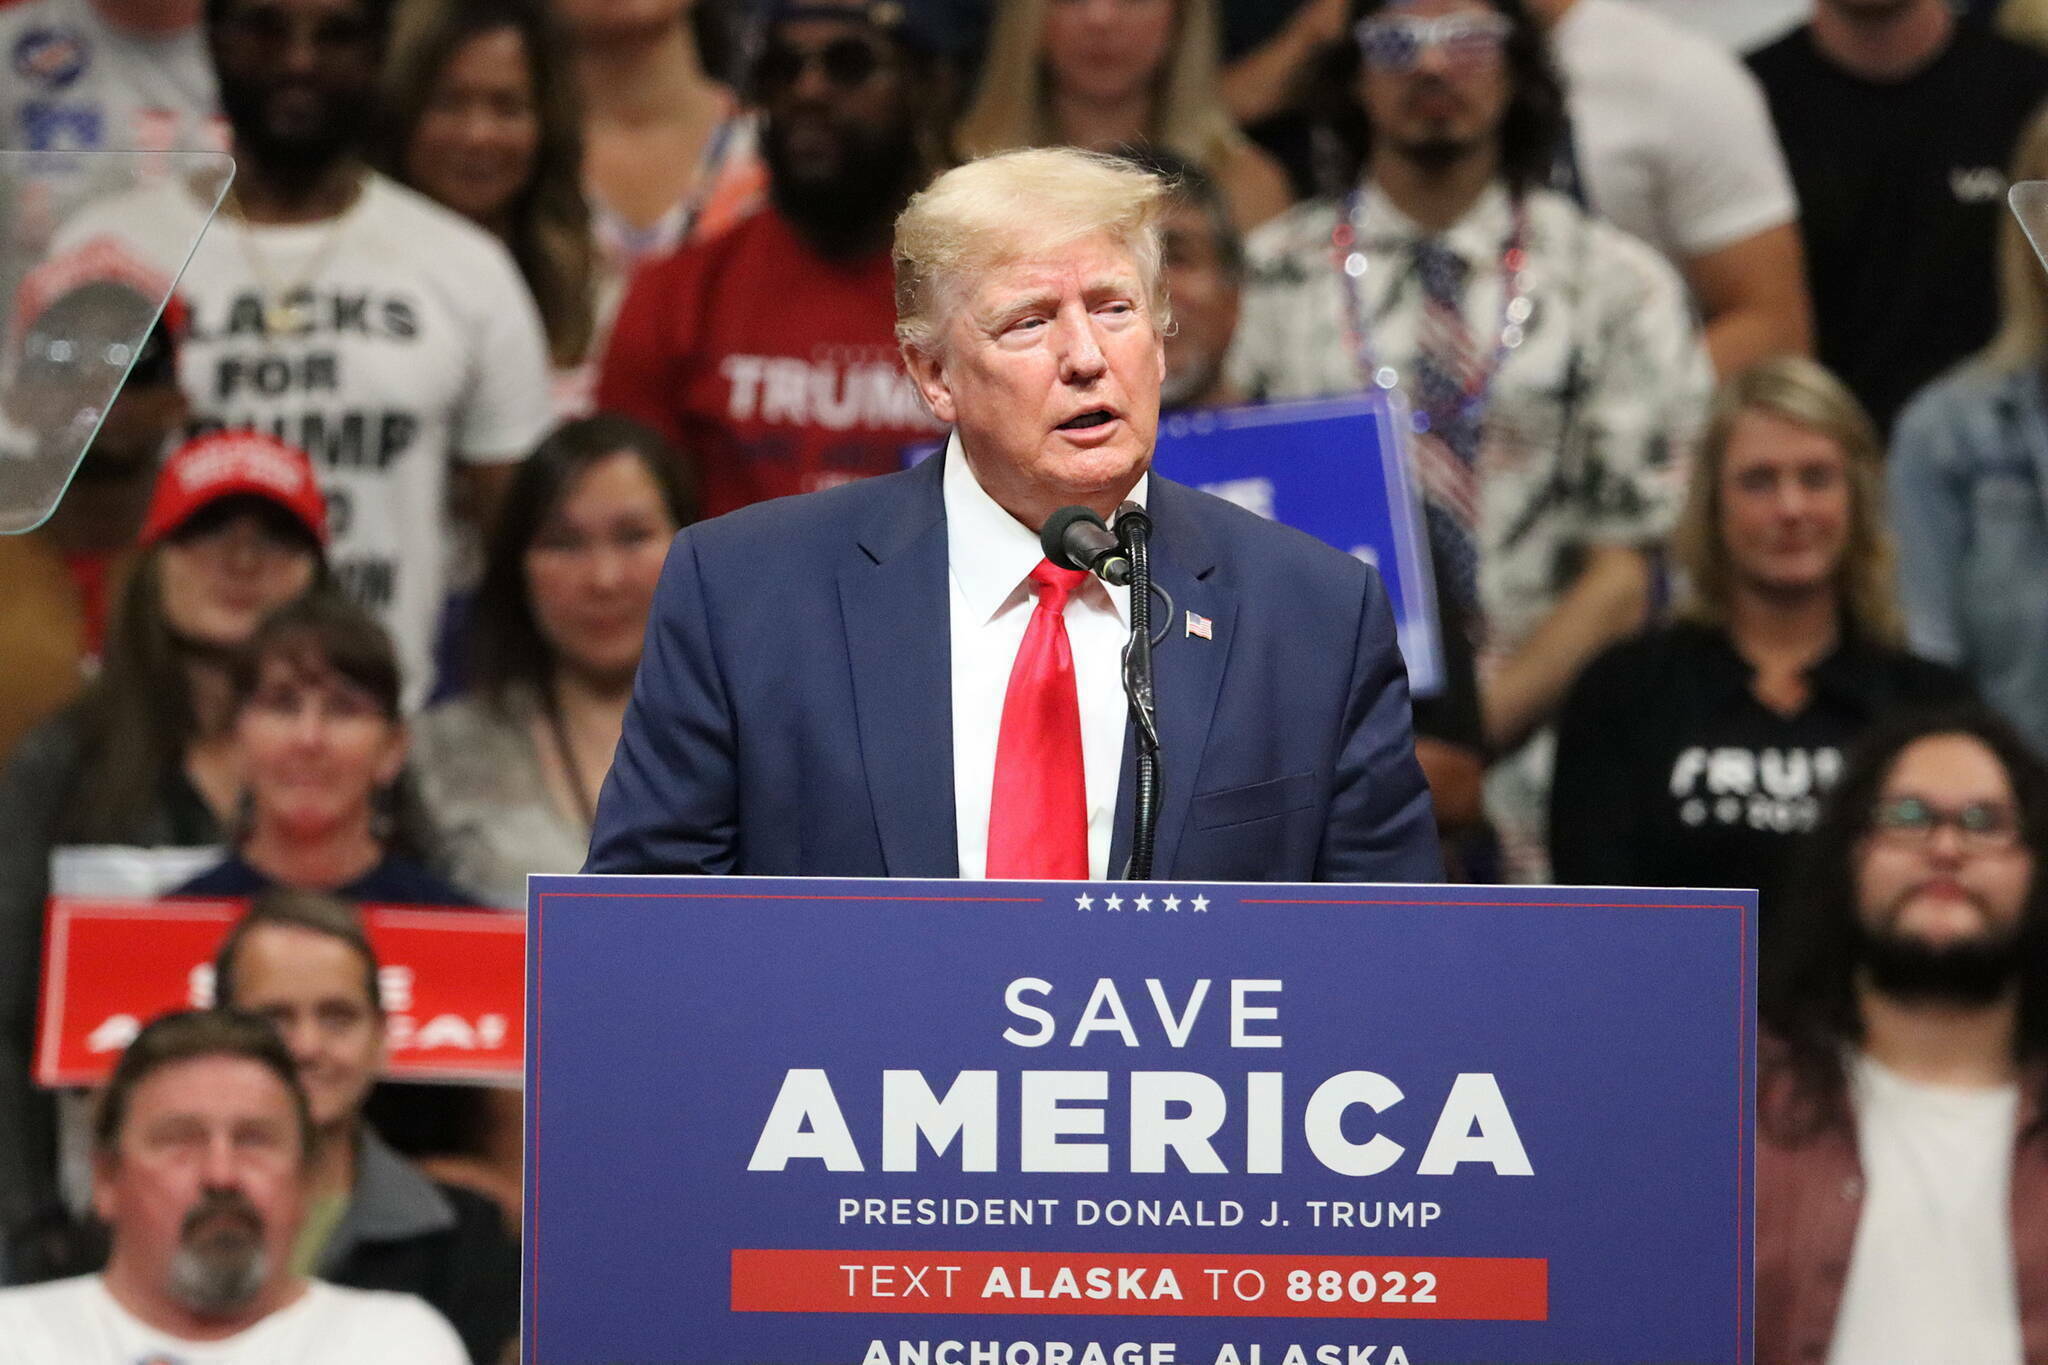 Former President Donald Trump speaks to a capacity crowd at the Alaska Airlines Center in Anchorage on July 9, 2022. (Mark Sabbatini / Juneau Empire file photo)